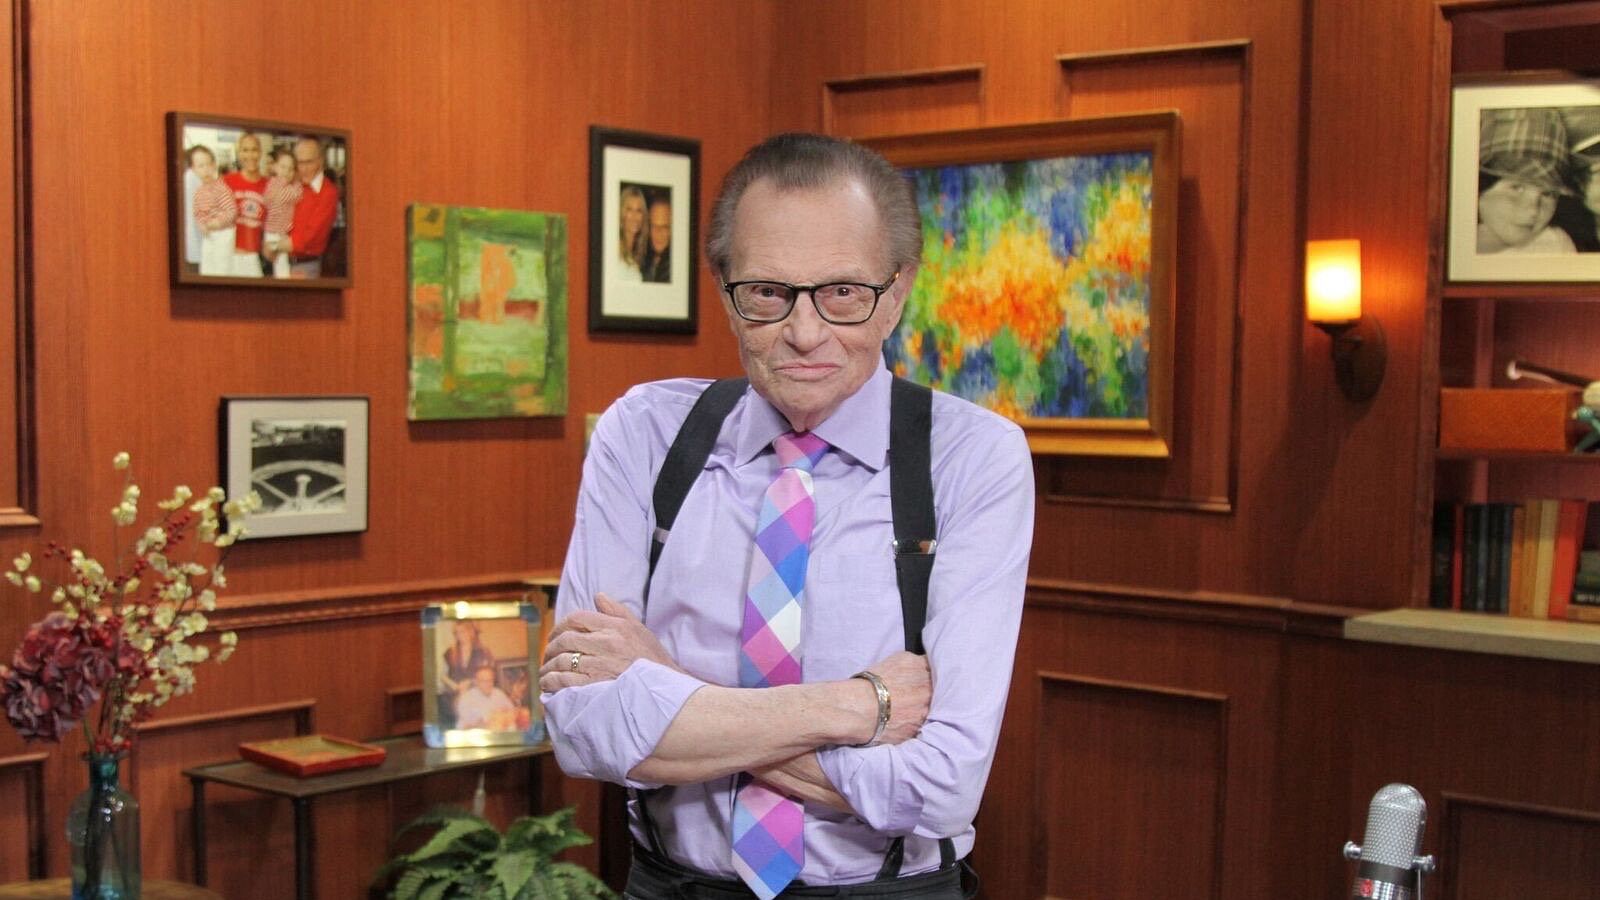 Here's what made Larry King an icon.